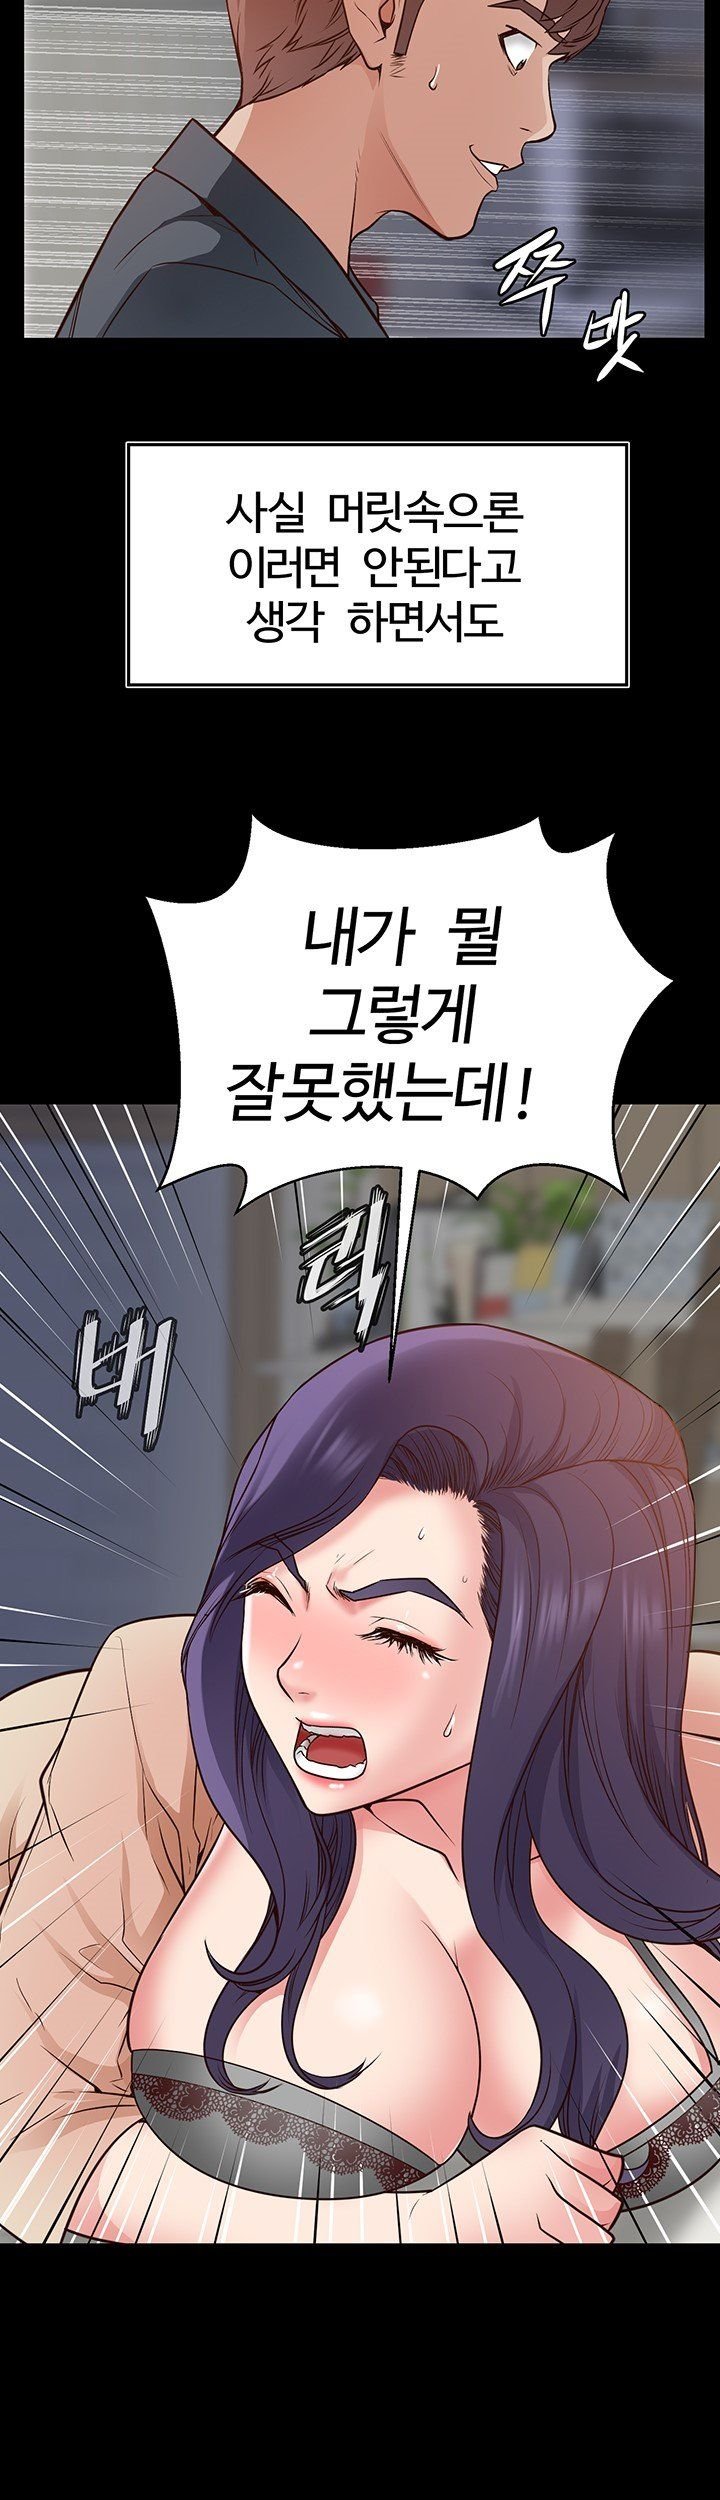 bs-anger-raw-chap-3-13